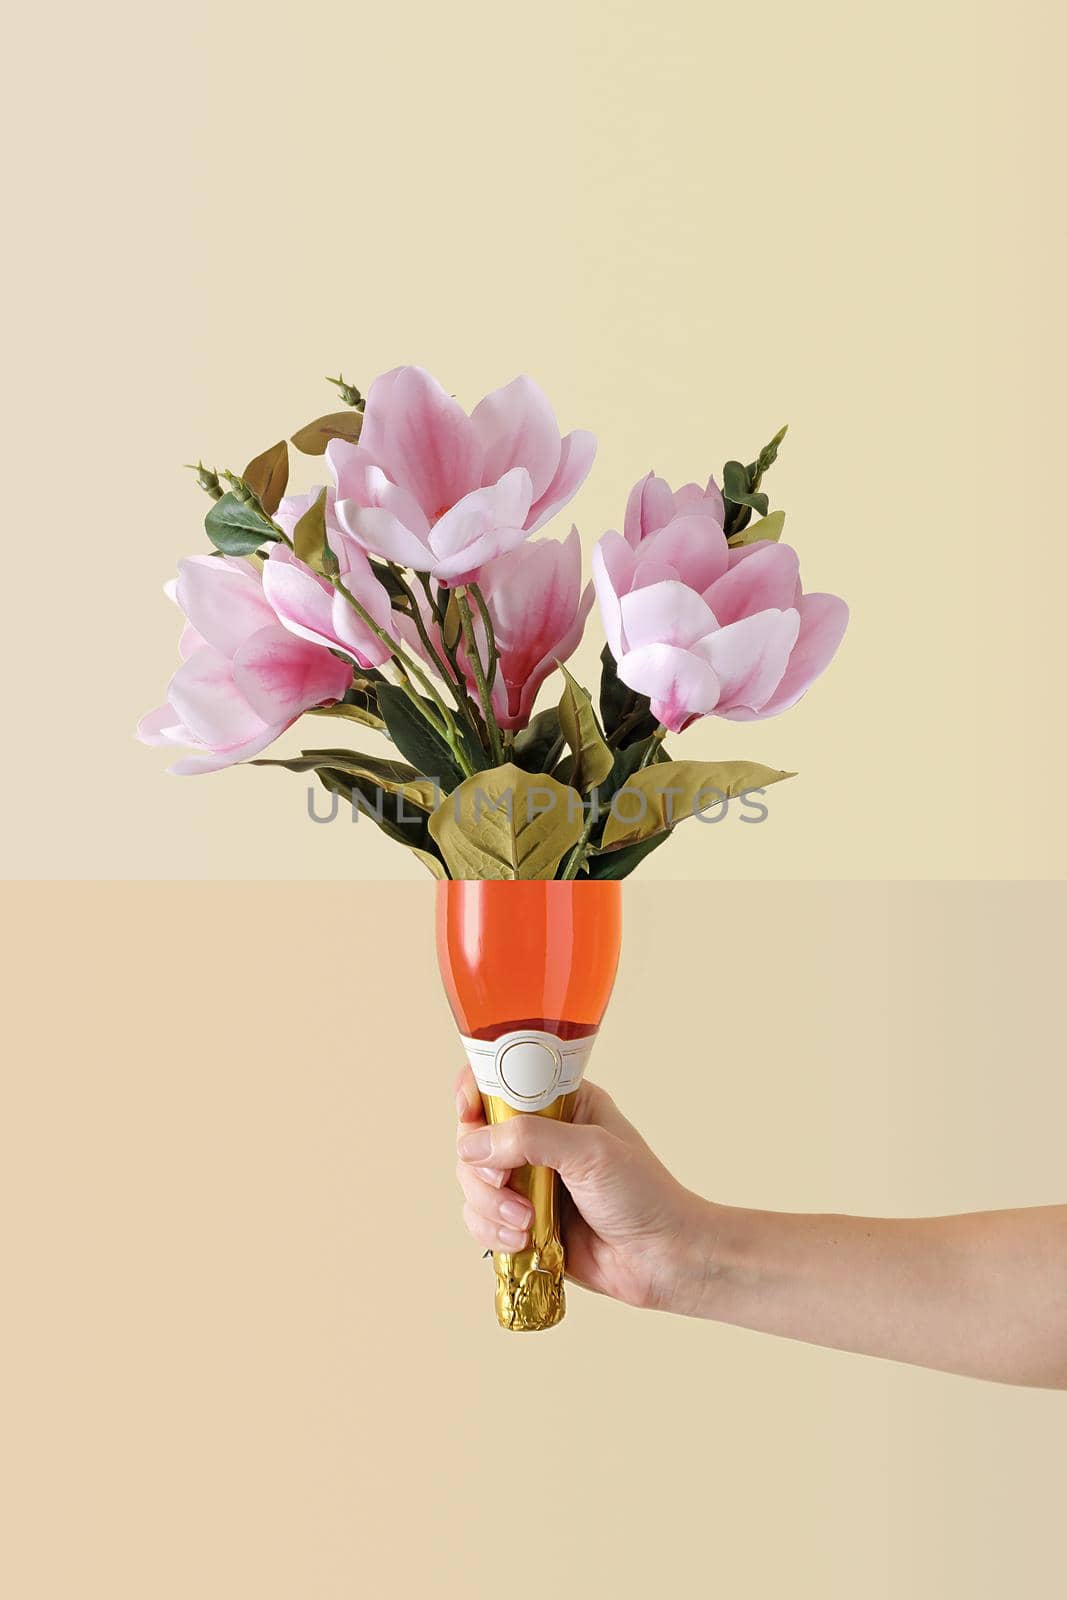 Conceptual image of fresh summer flowers in a luxury rose champagne bottle held by an extended hand over a pale yellow background for a special occasion